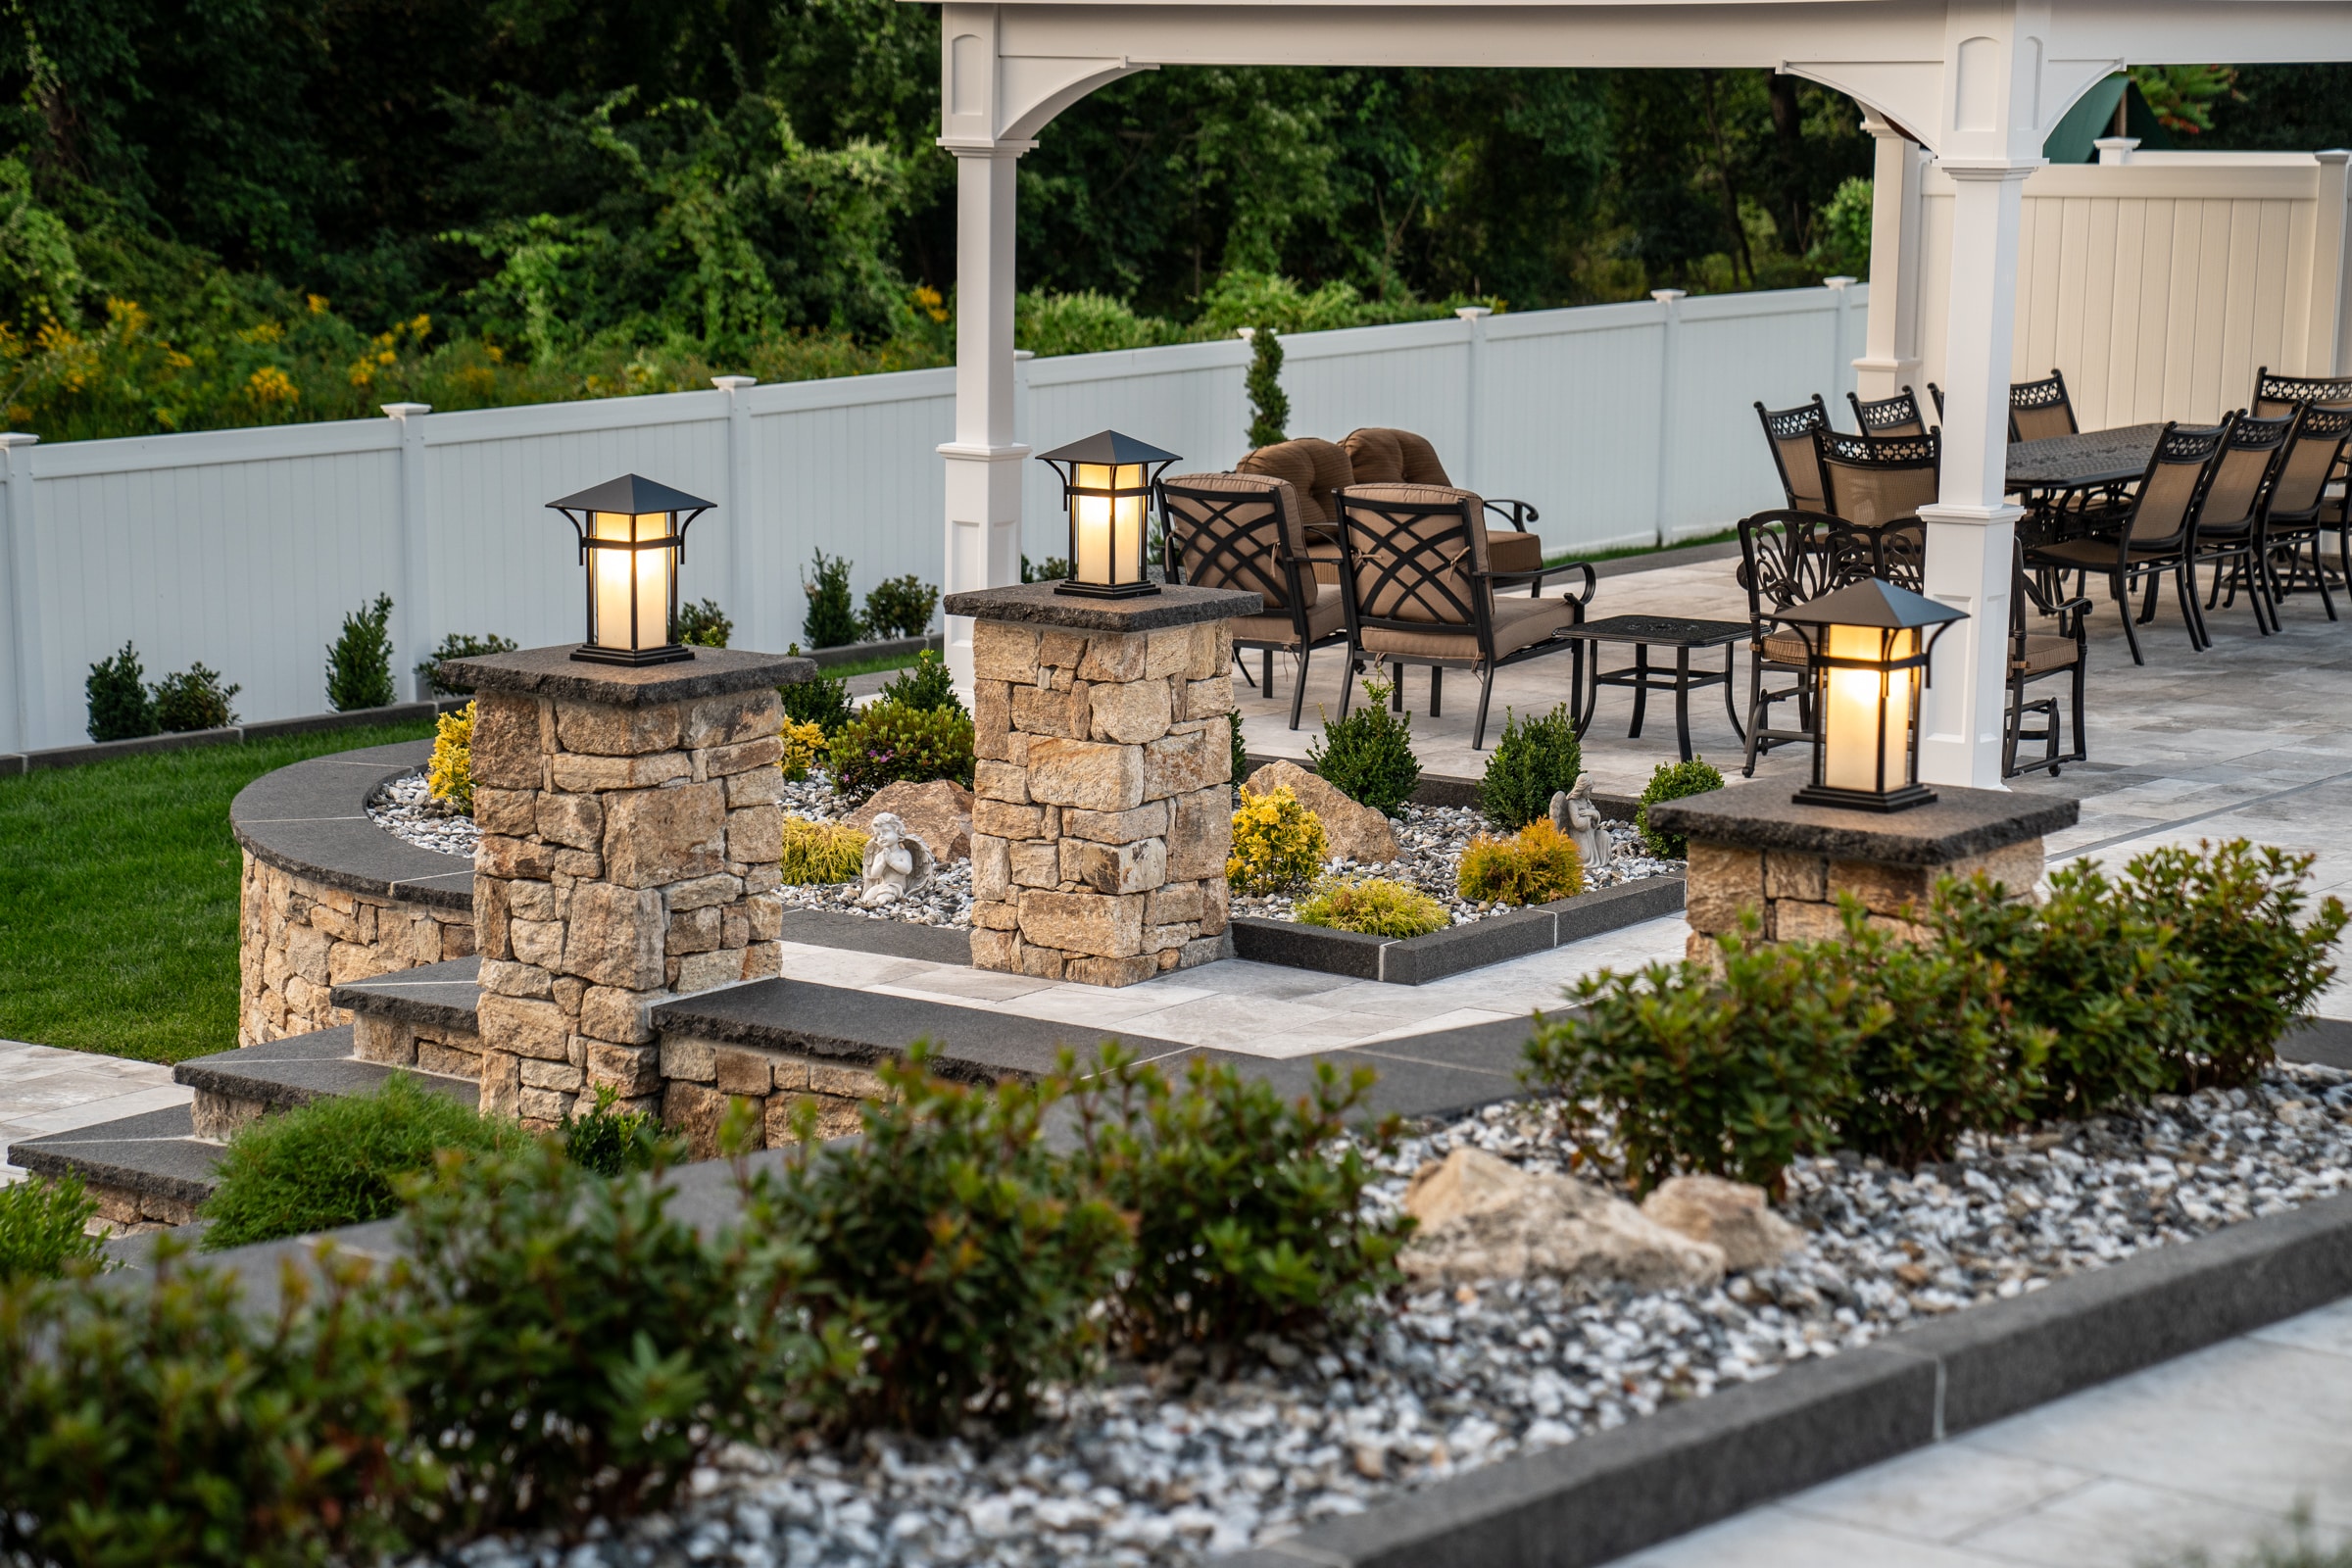 Stone columns and landscaping elevate this high-end backyard built by Dex by Terra in Grafton, Massachusetts.